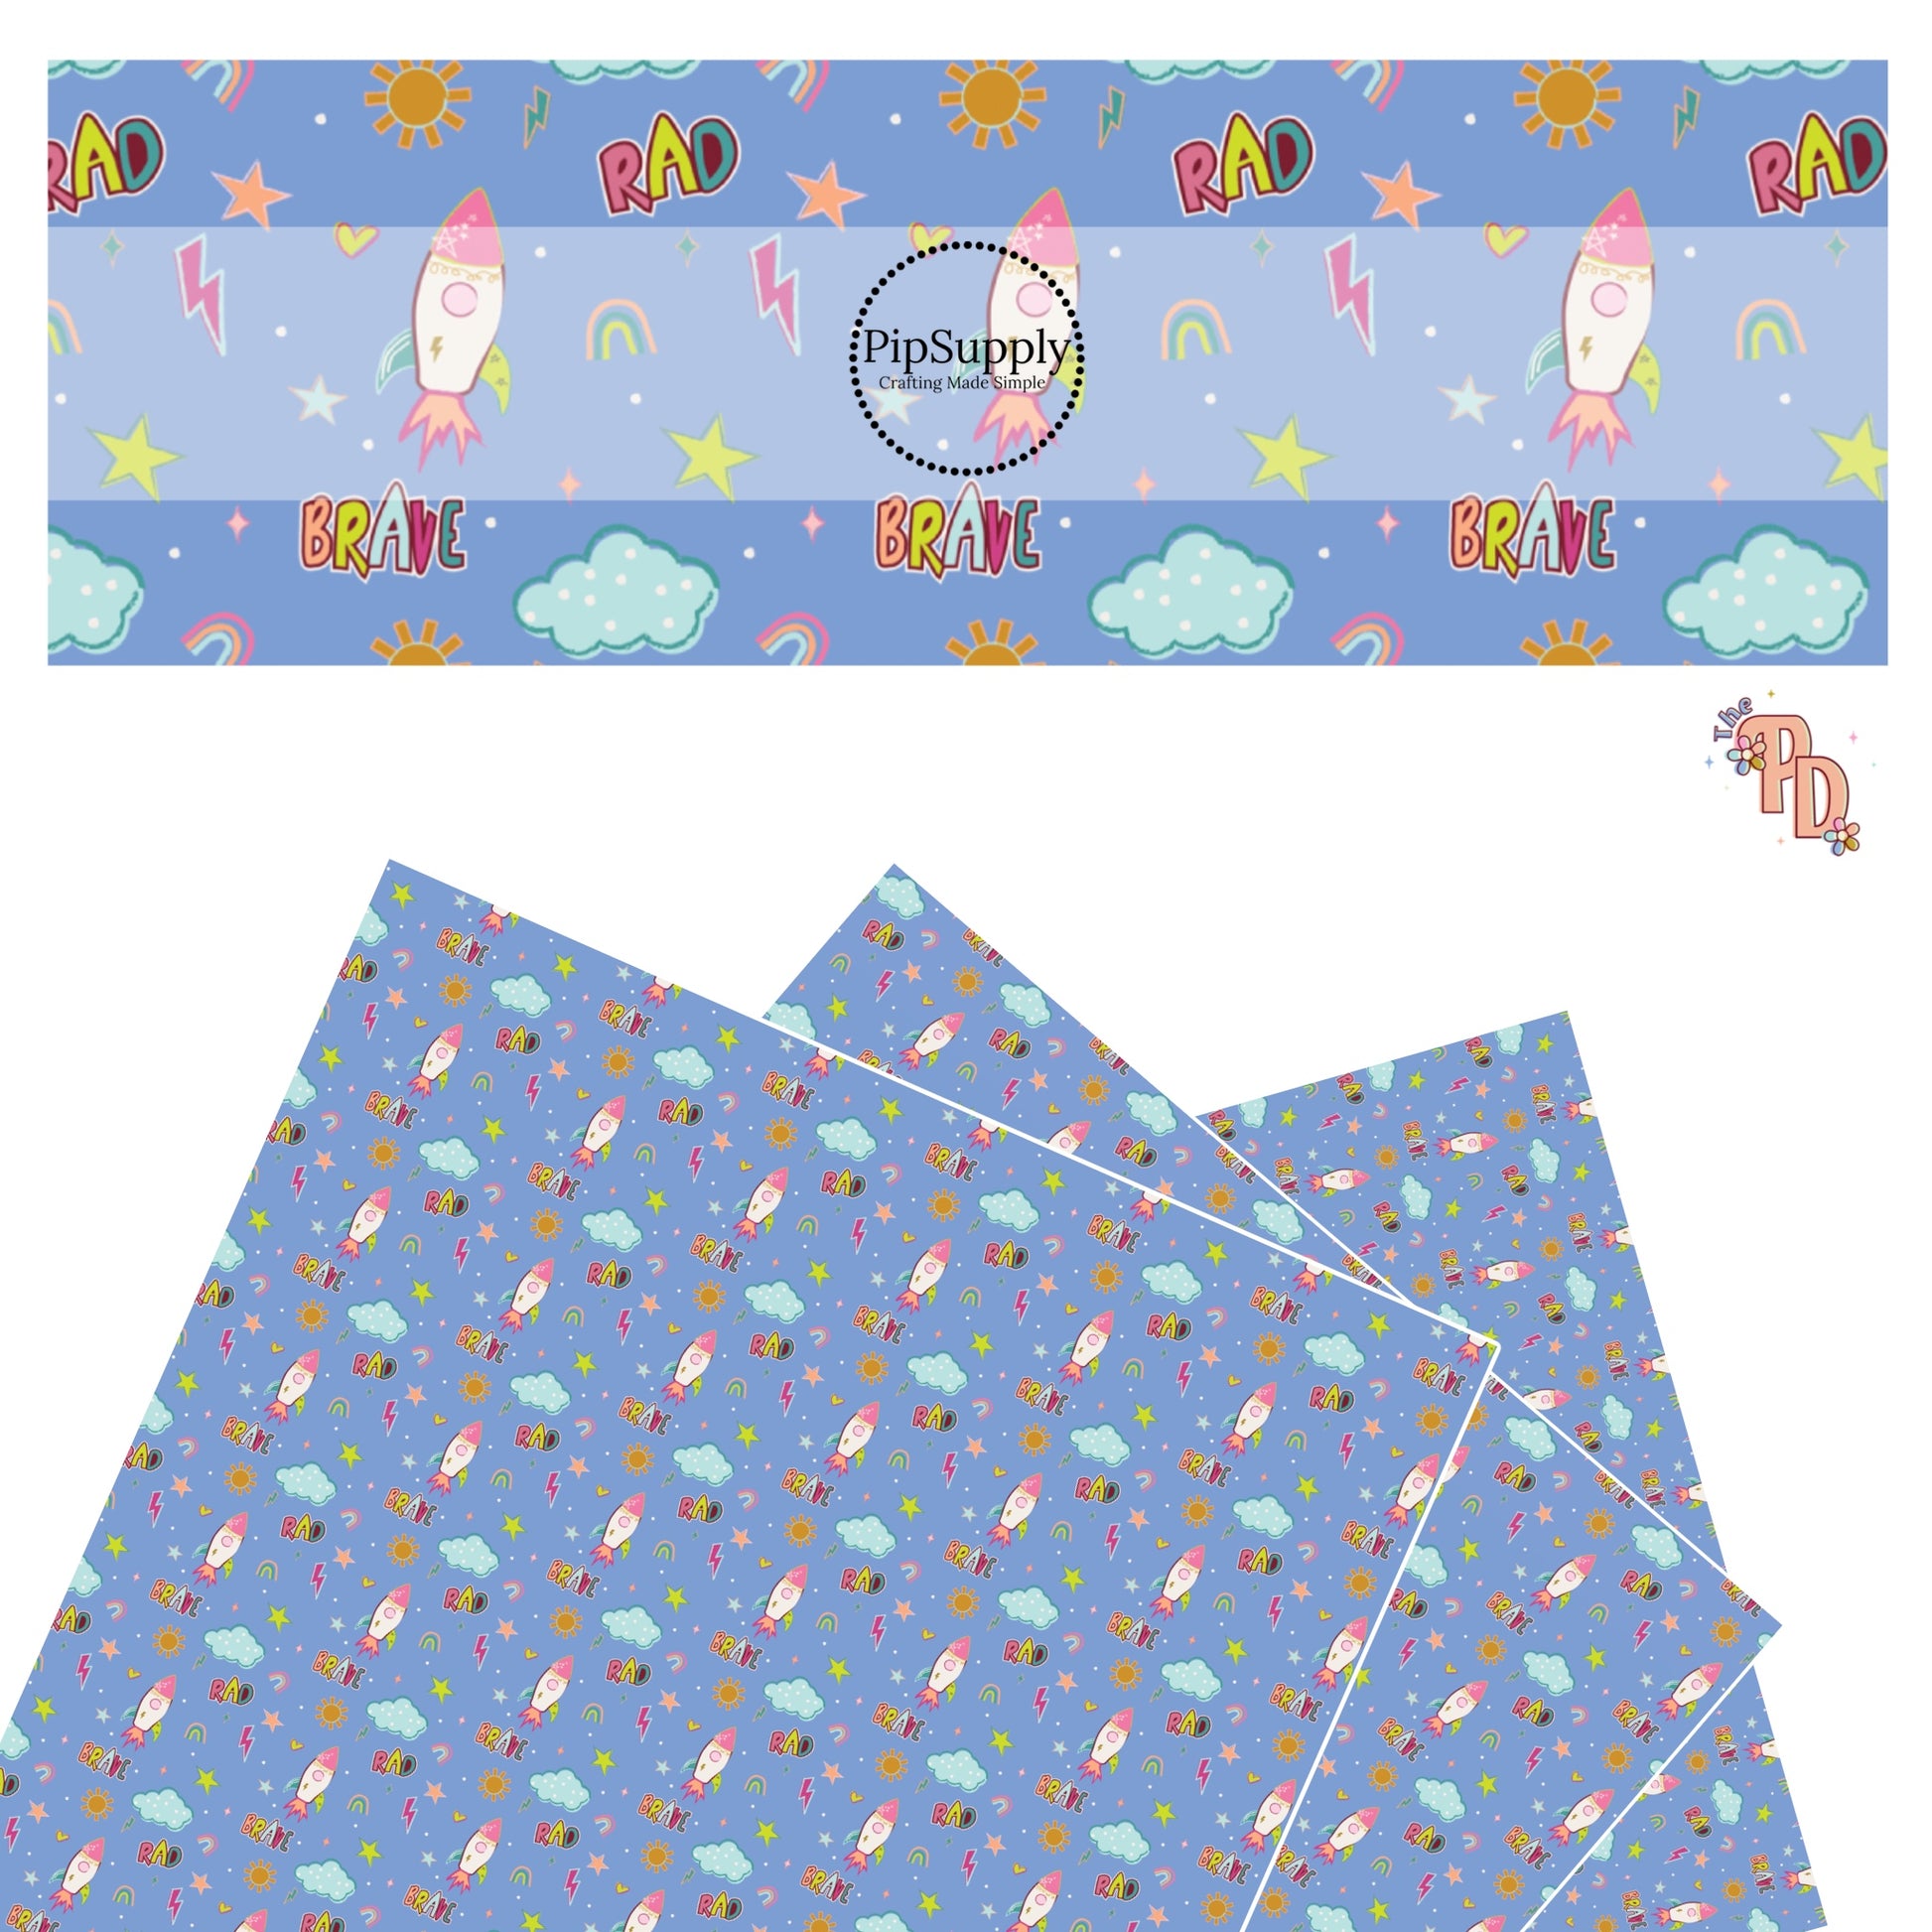 Spaceships, rainbows, clouds, stars, hearts, and sayings on blue faux leather sheets